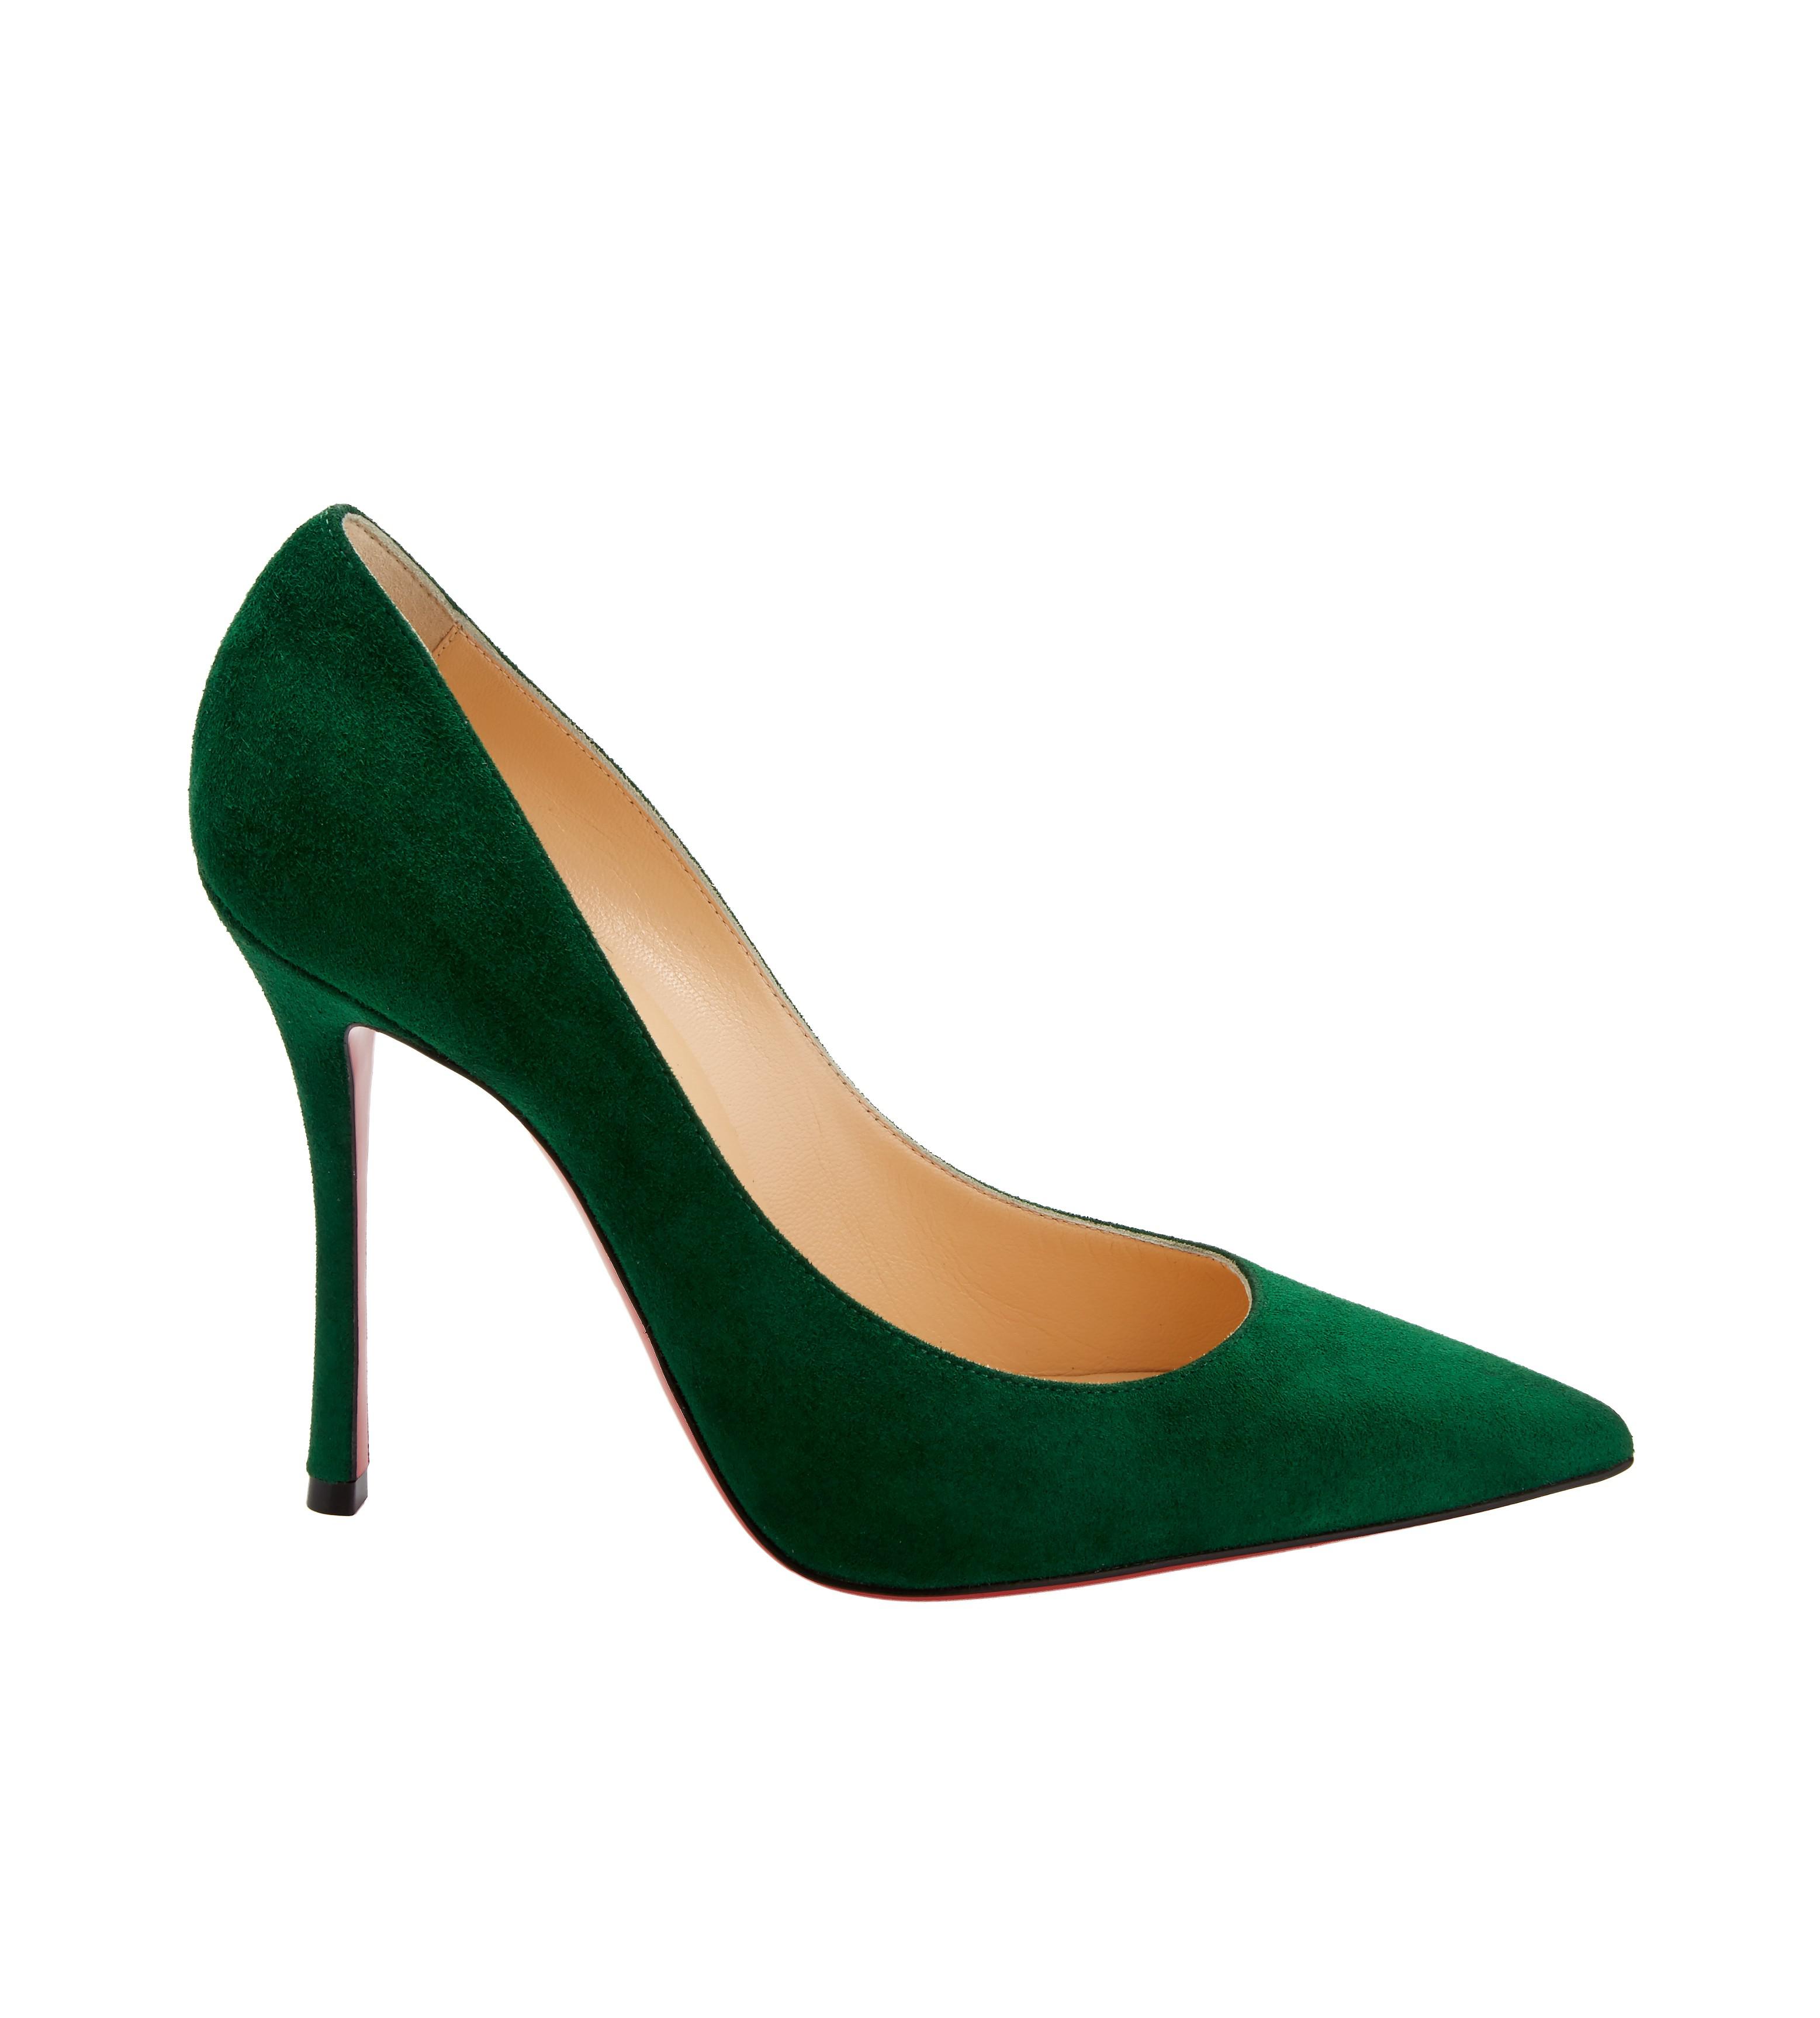 Lyst - Christian Louboutin Decoltish Jungle Green Suede Pumps in Green